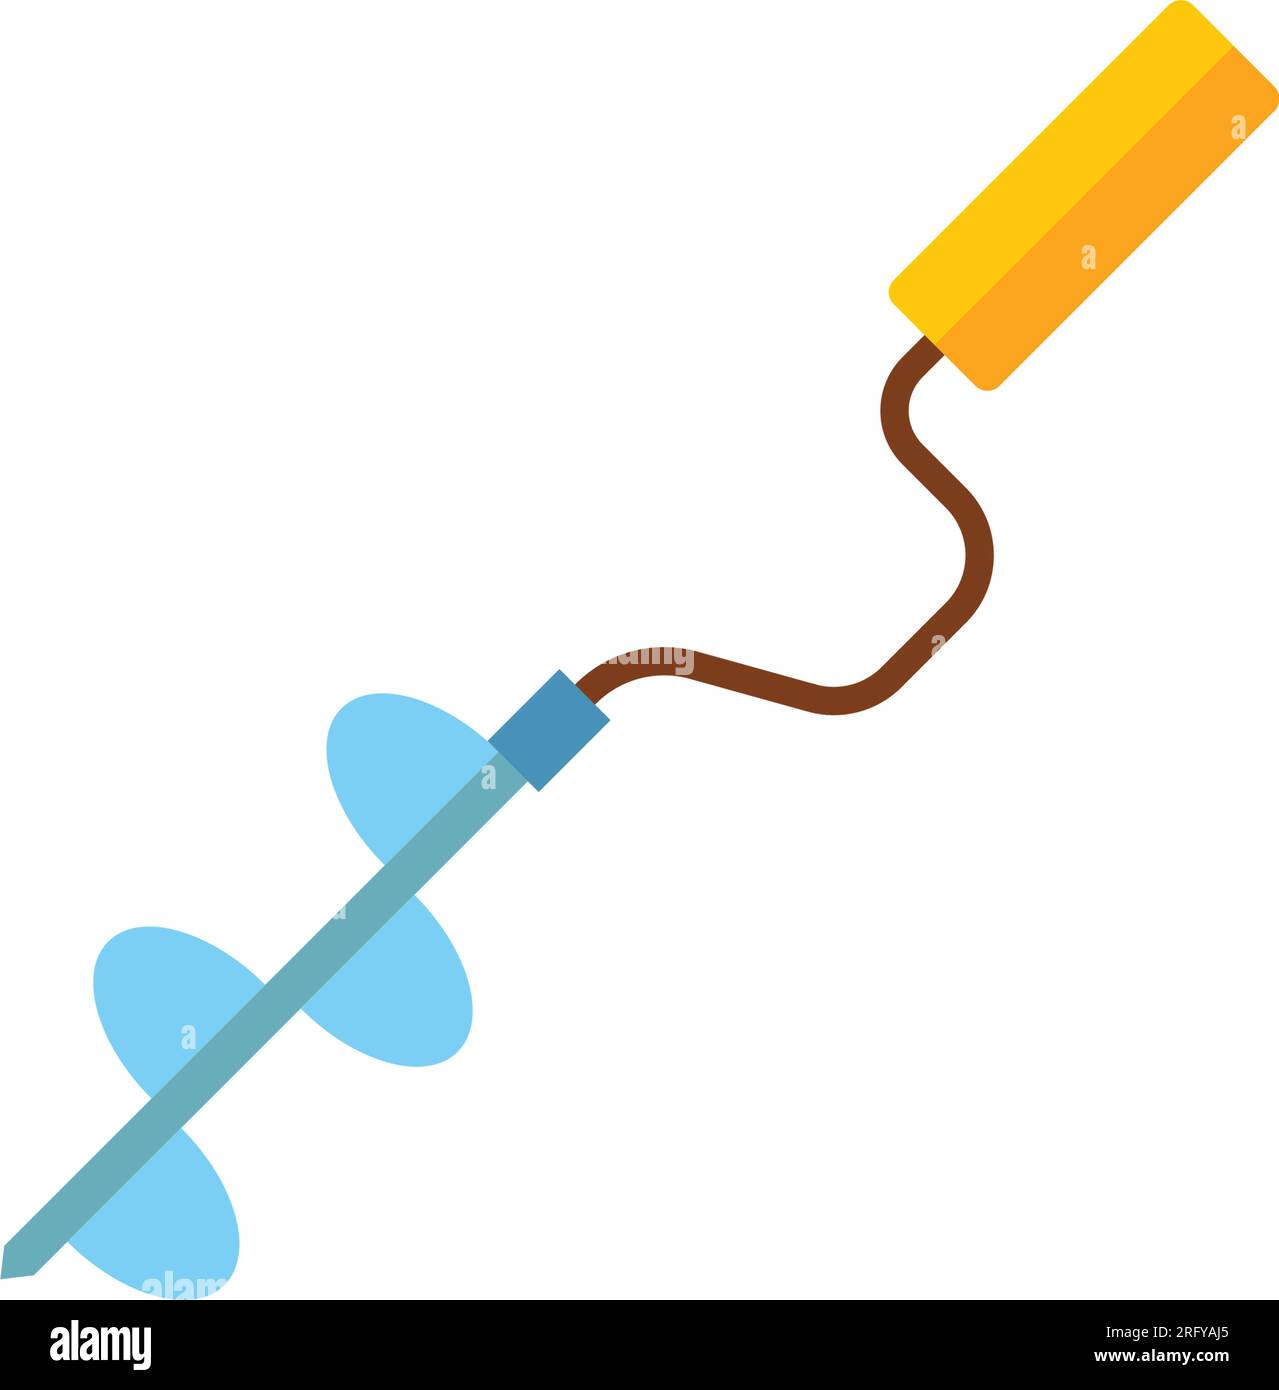 Drill for ice fishing vector icon Stock Vector